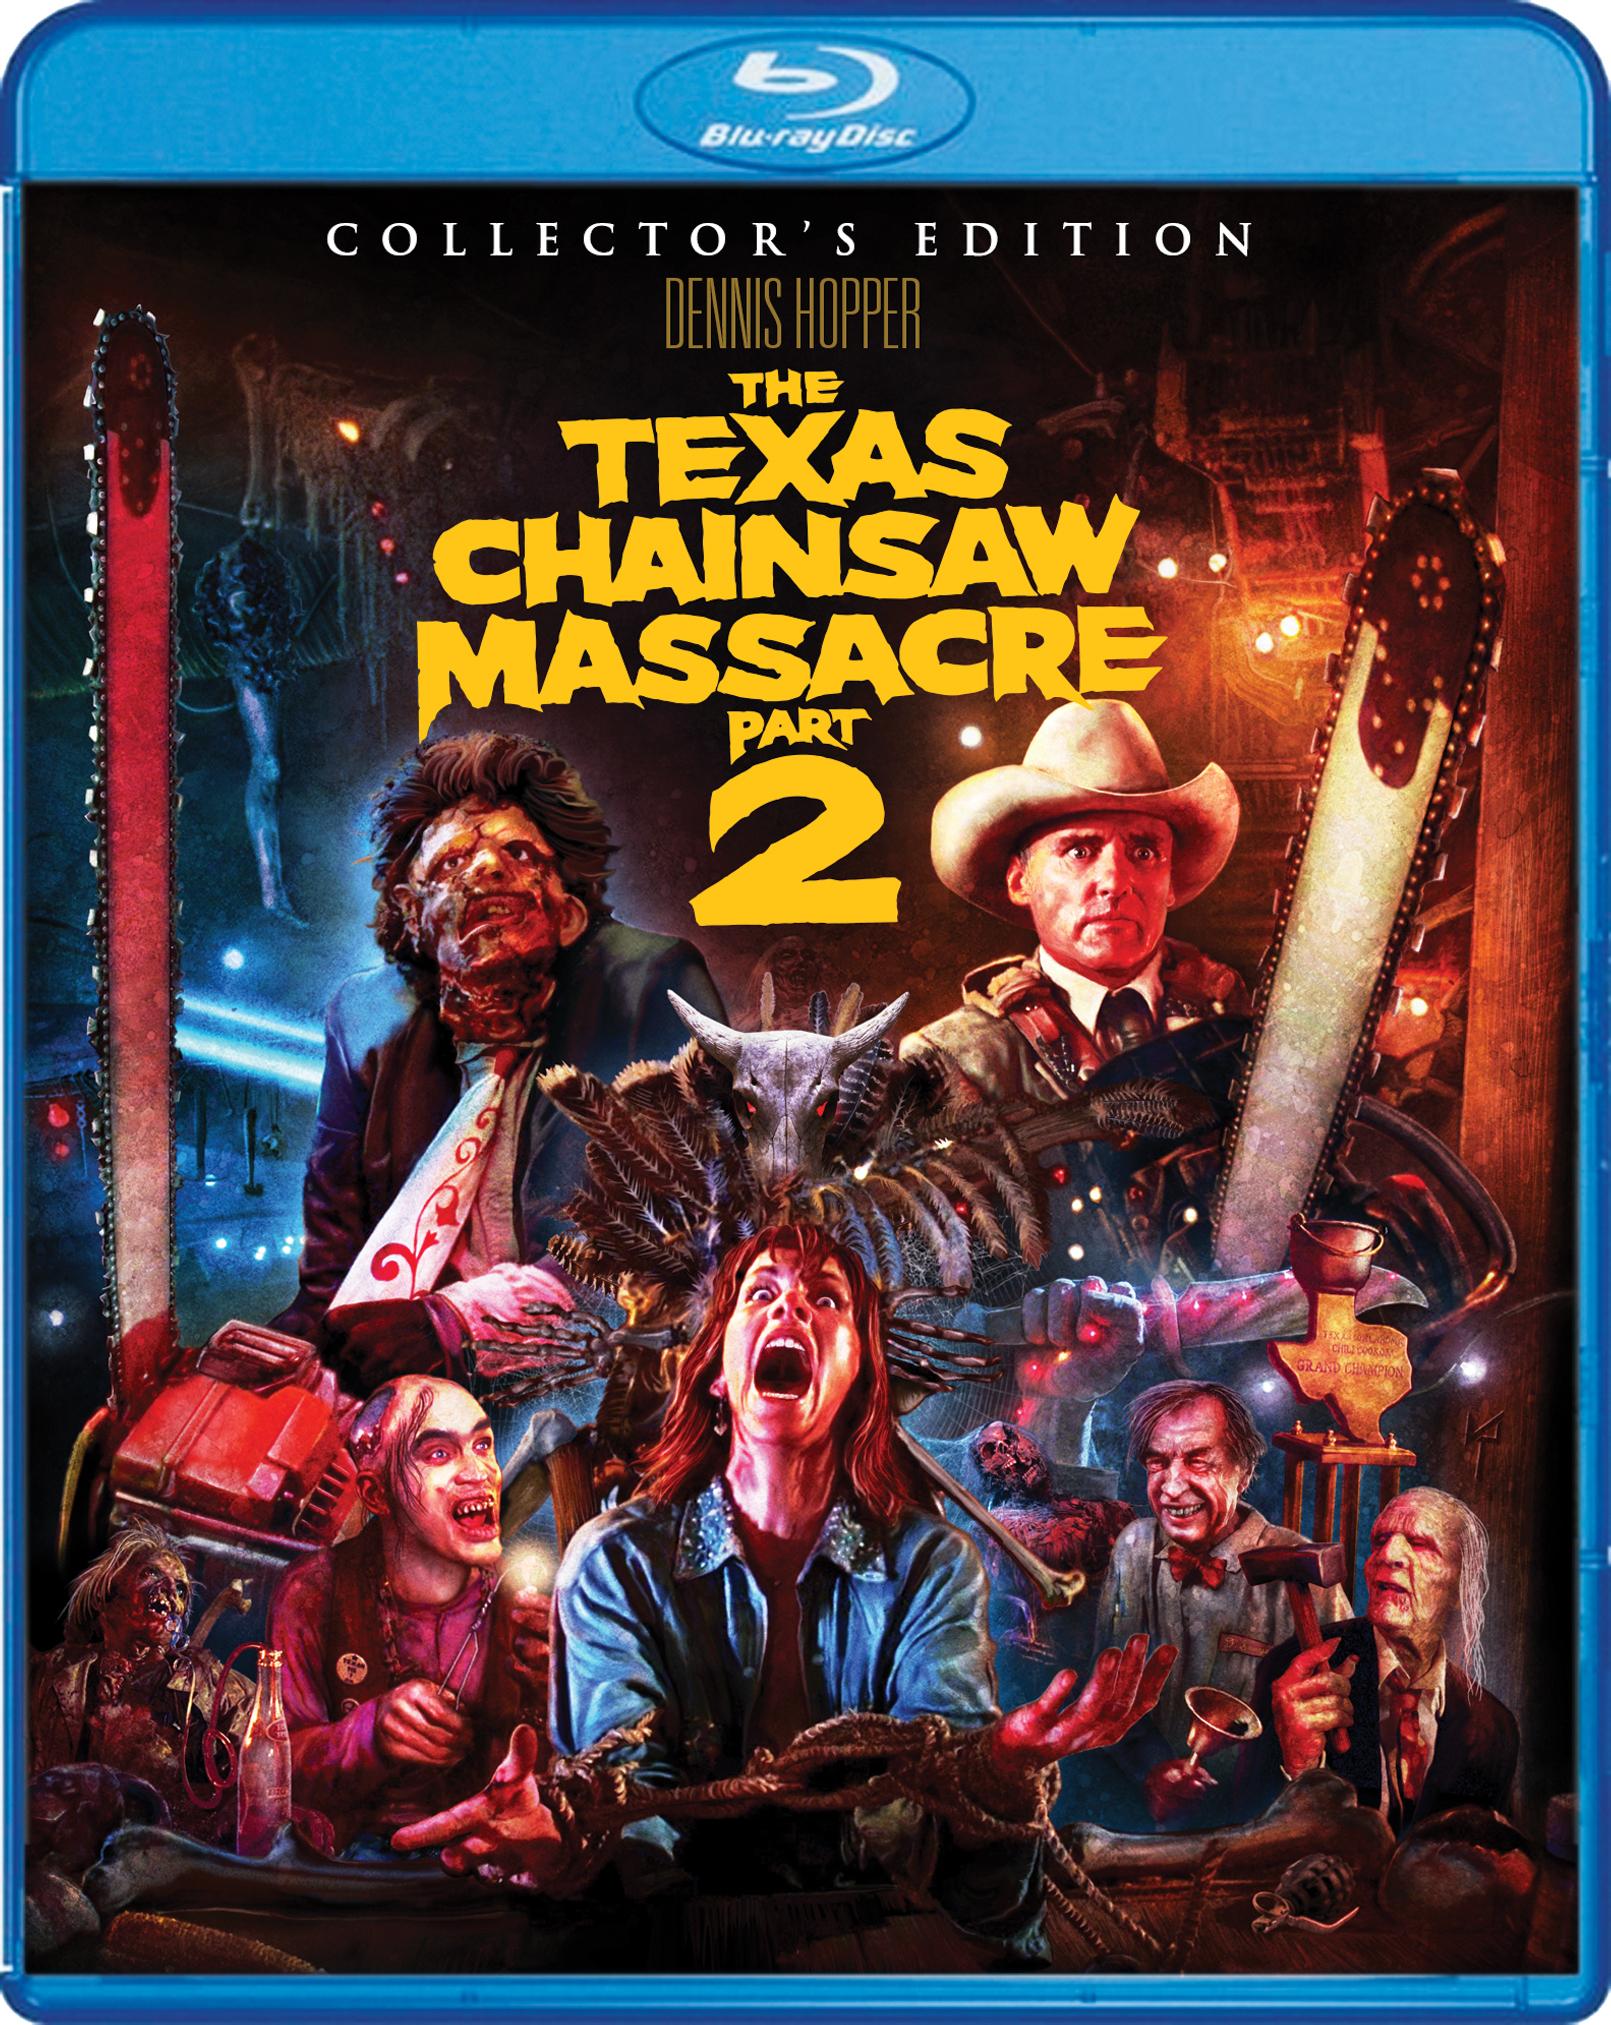 [Blu-Ray Review] ‘The Texas Chainsaw Massacre 2’: Arriving On Collector’s Edition 2-Disc Blu-ray April 19, 2016 From Scream Factory 2